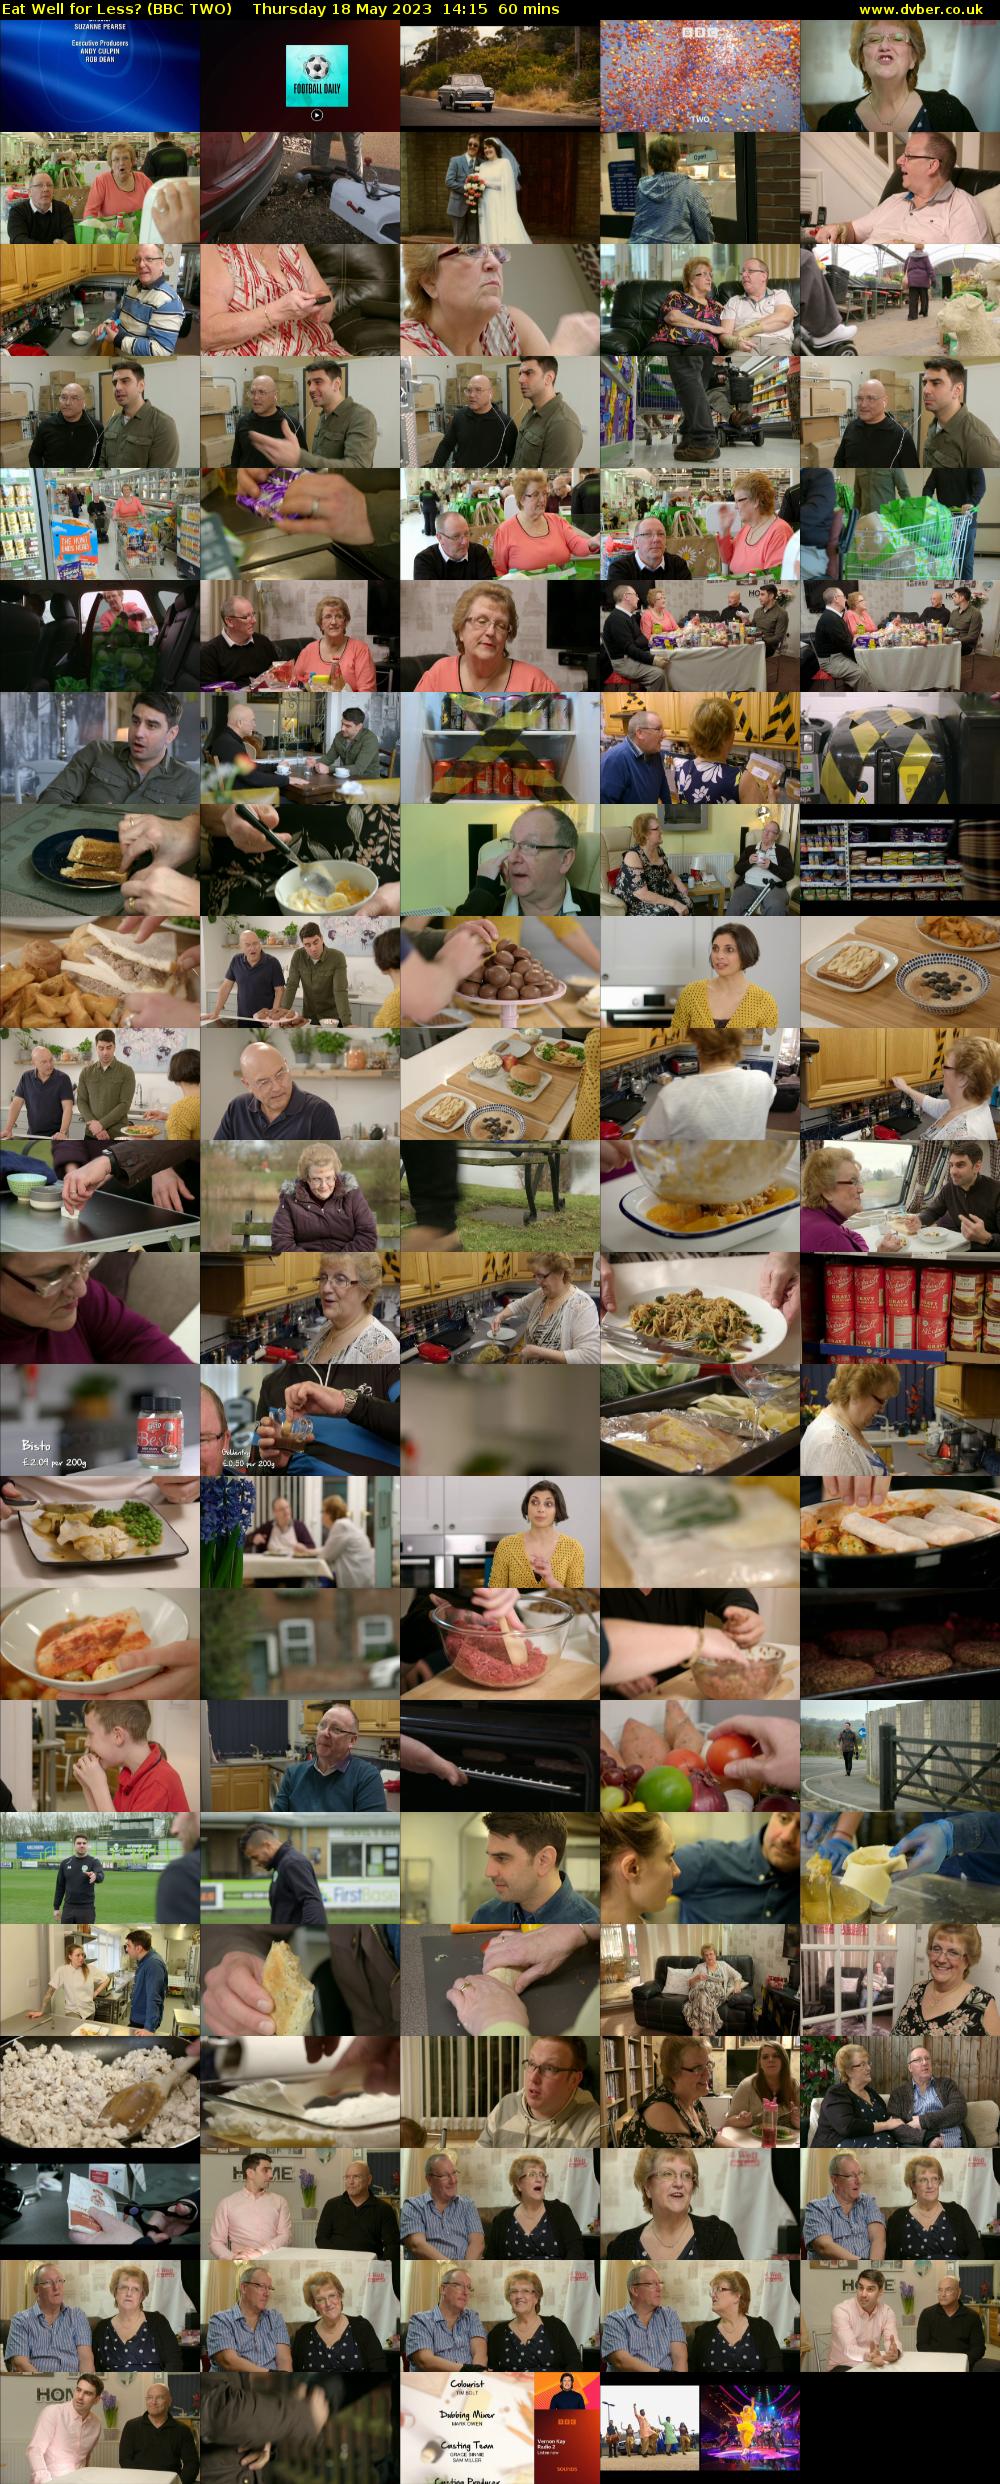 Eat Well for Less? (BBC TWO) Thursday 18 May 2023 14:15 - 15:15